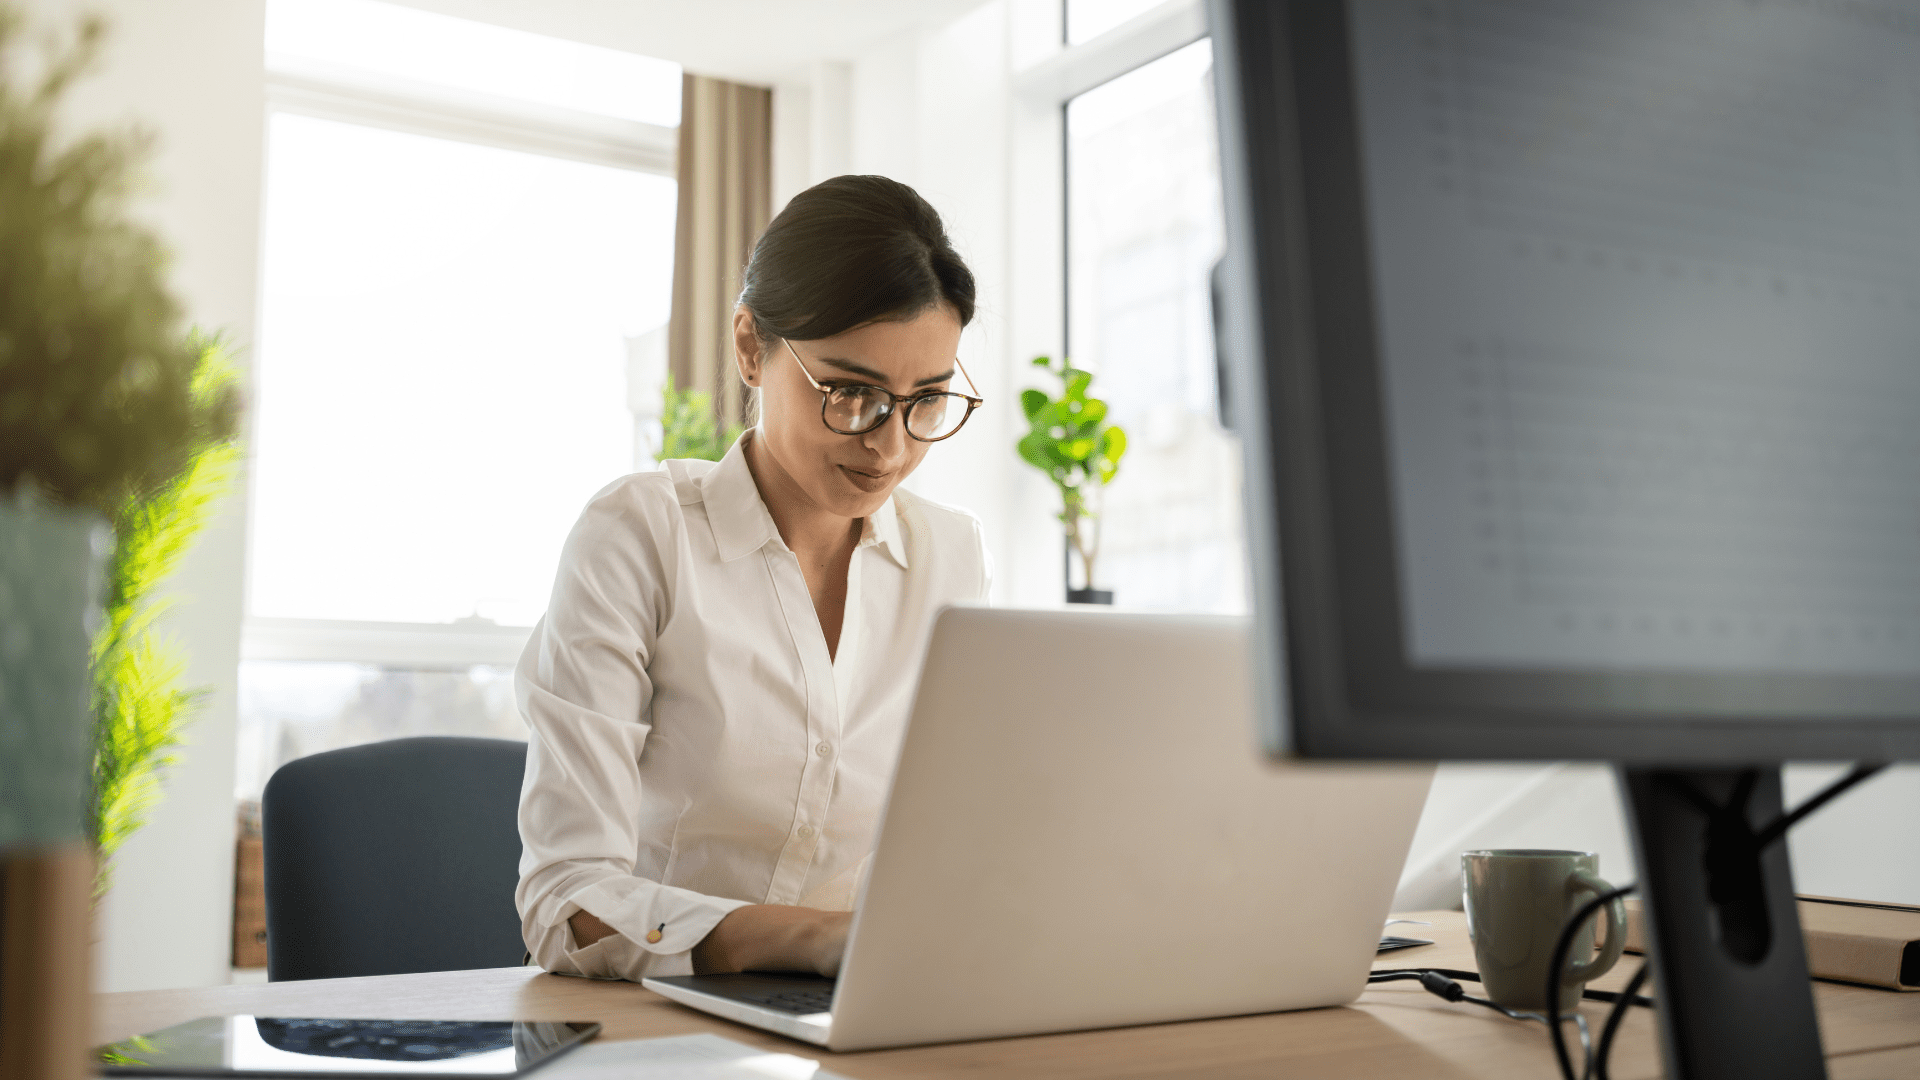 Stock - People - Woman Typing on Laptop